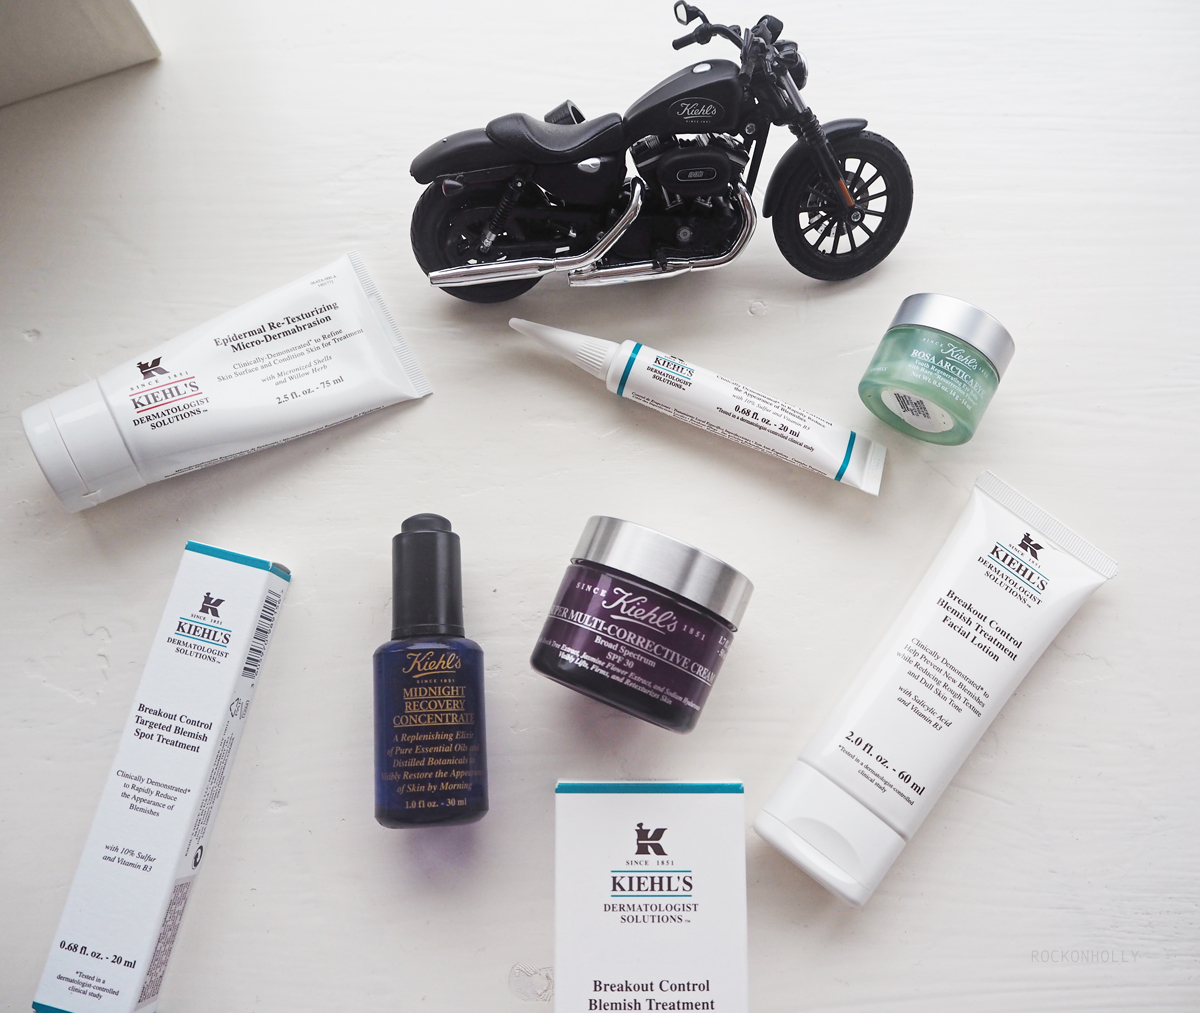 Kiehl's Breakout Treatment on the Rock On Holly blog